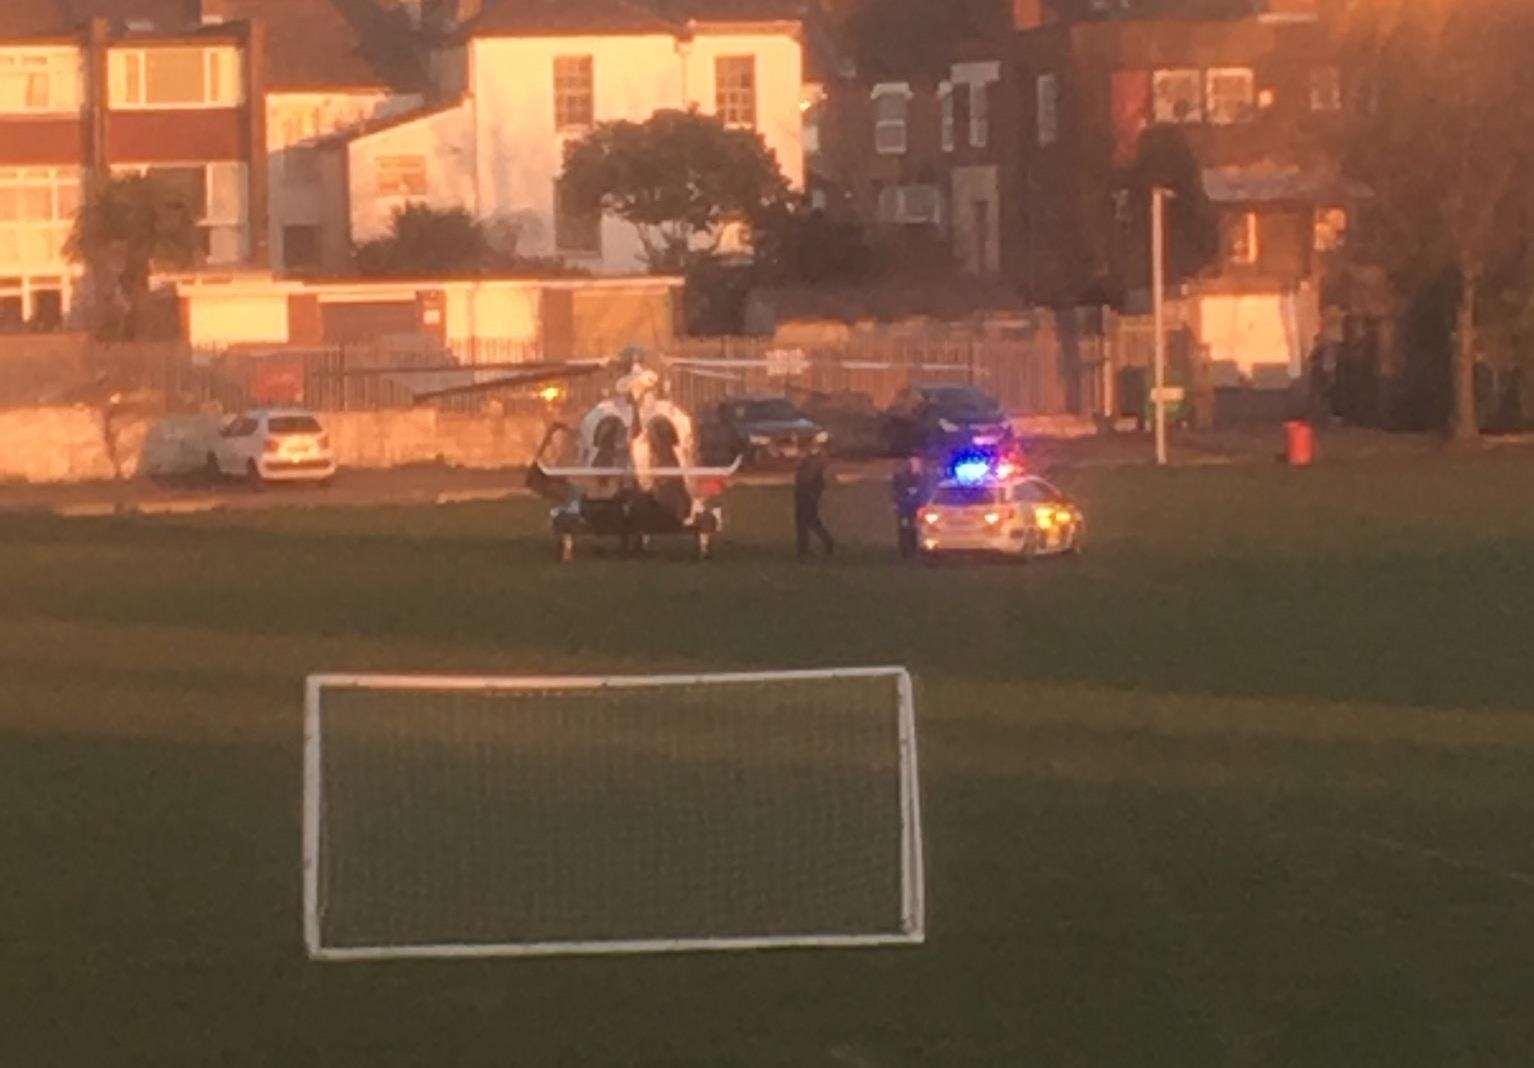 The air ambulance had to land on a cricket pitch, off Wrotham Road, Gravesend. Picture: @WBowle (7448037)